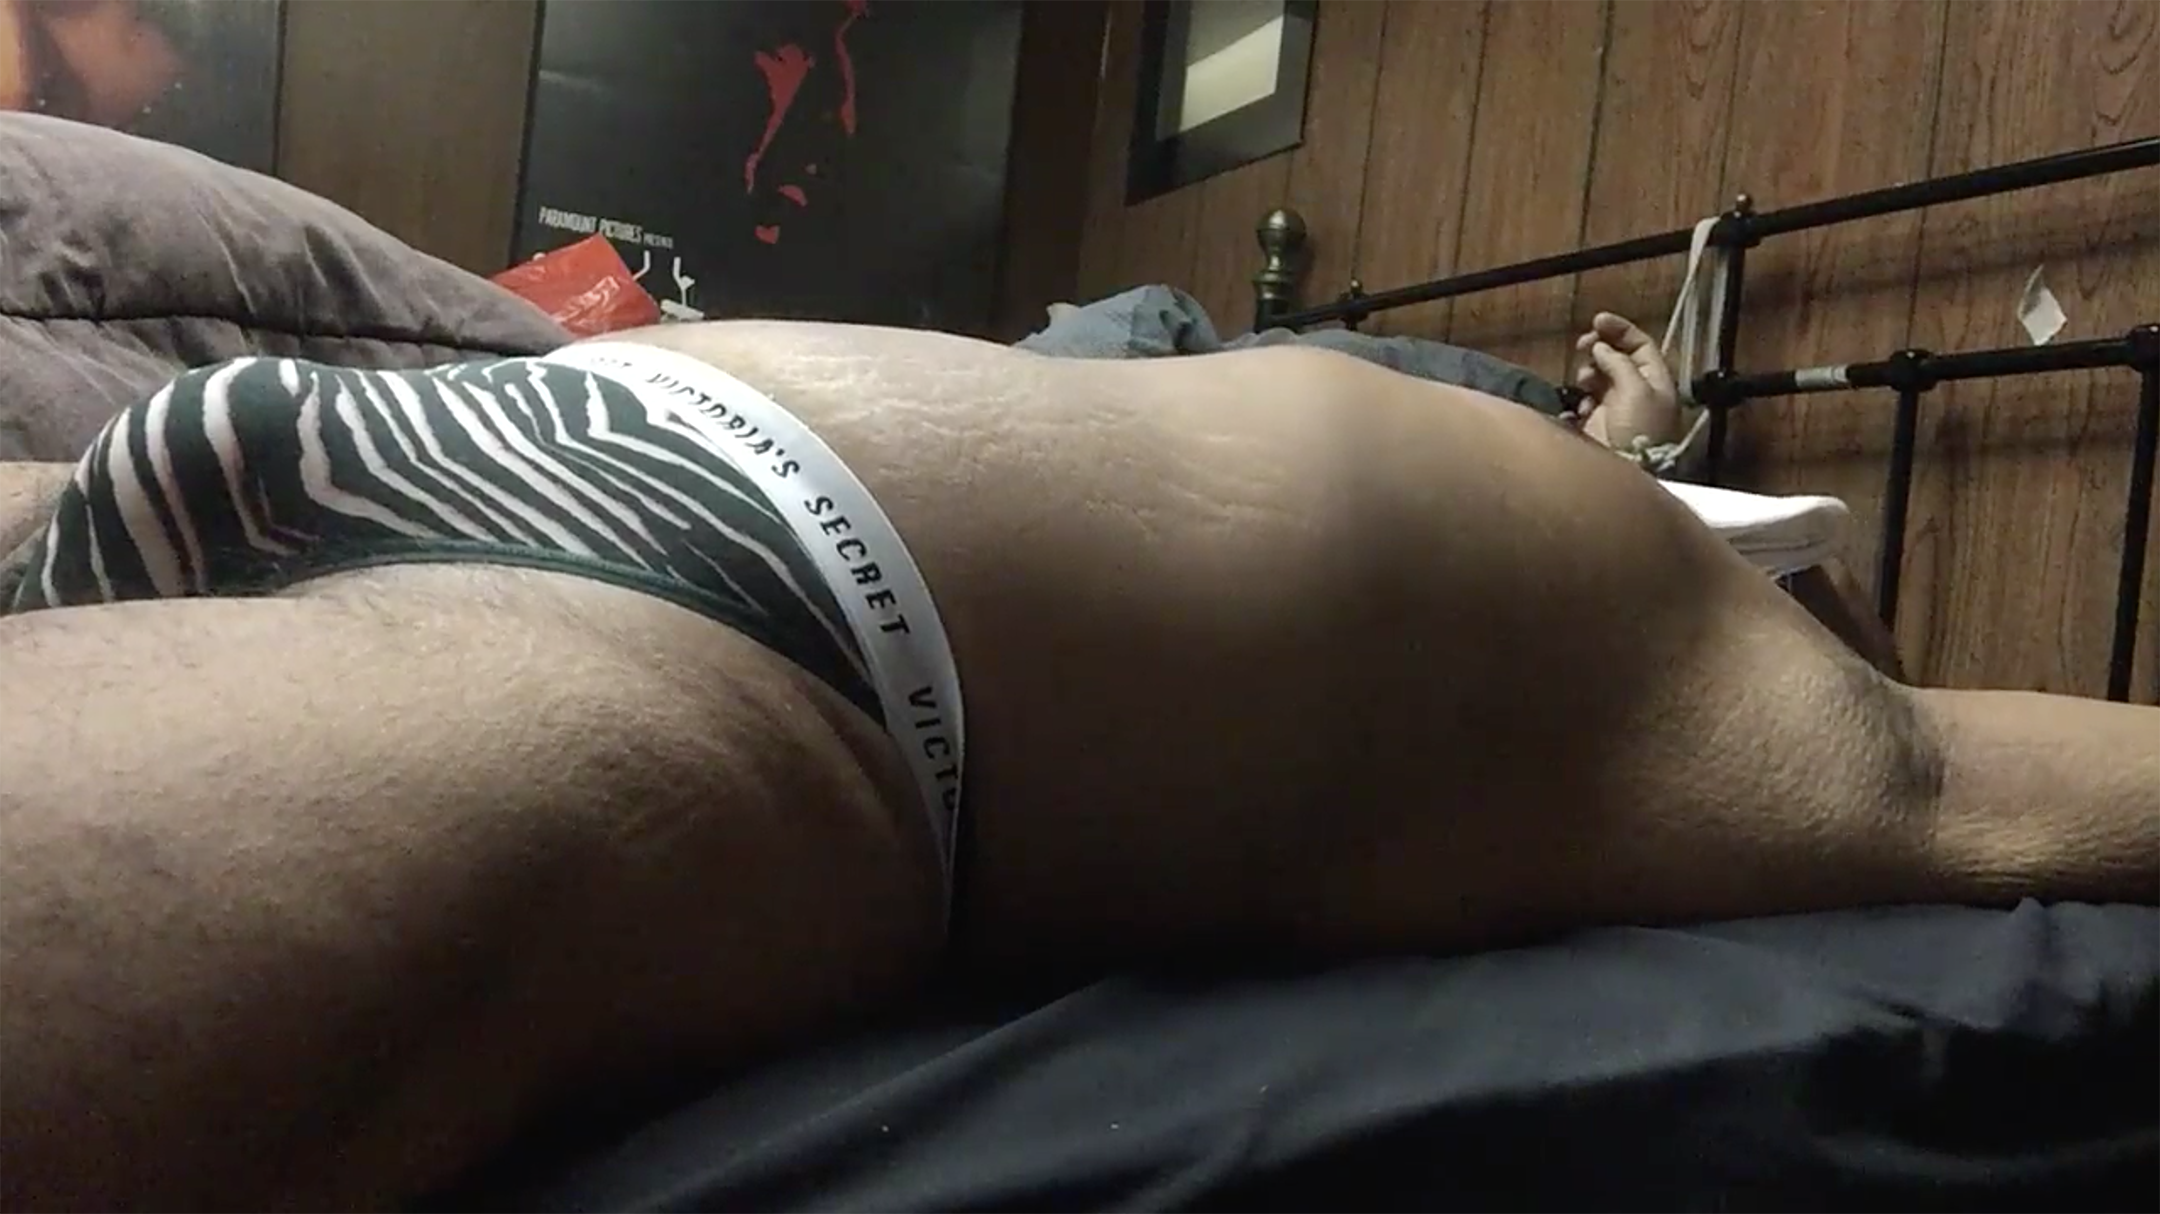 Tied Up In Bed - Tied up in bed in my panties - Amateur Gay Porn Pictures And Stories